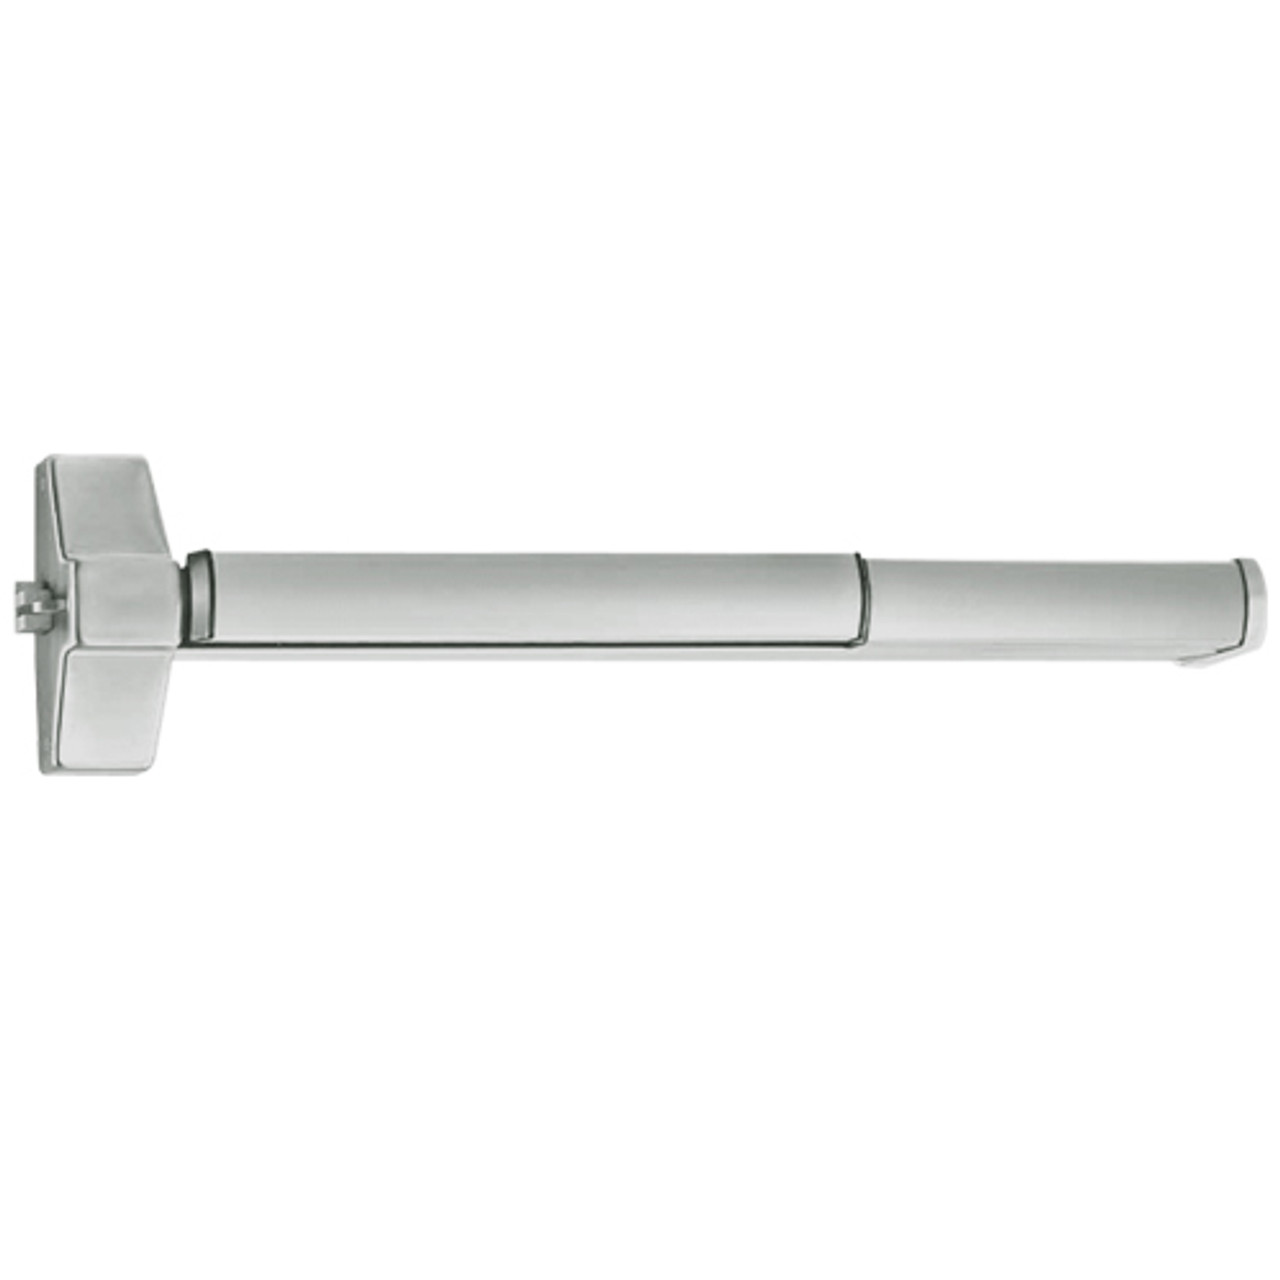 ED5200SA-619-W048-MELR Corbin ED5200 Series Fire Rated Exit Device with Motor Latch Retraction in Satin Nickel Finish